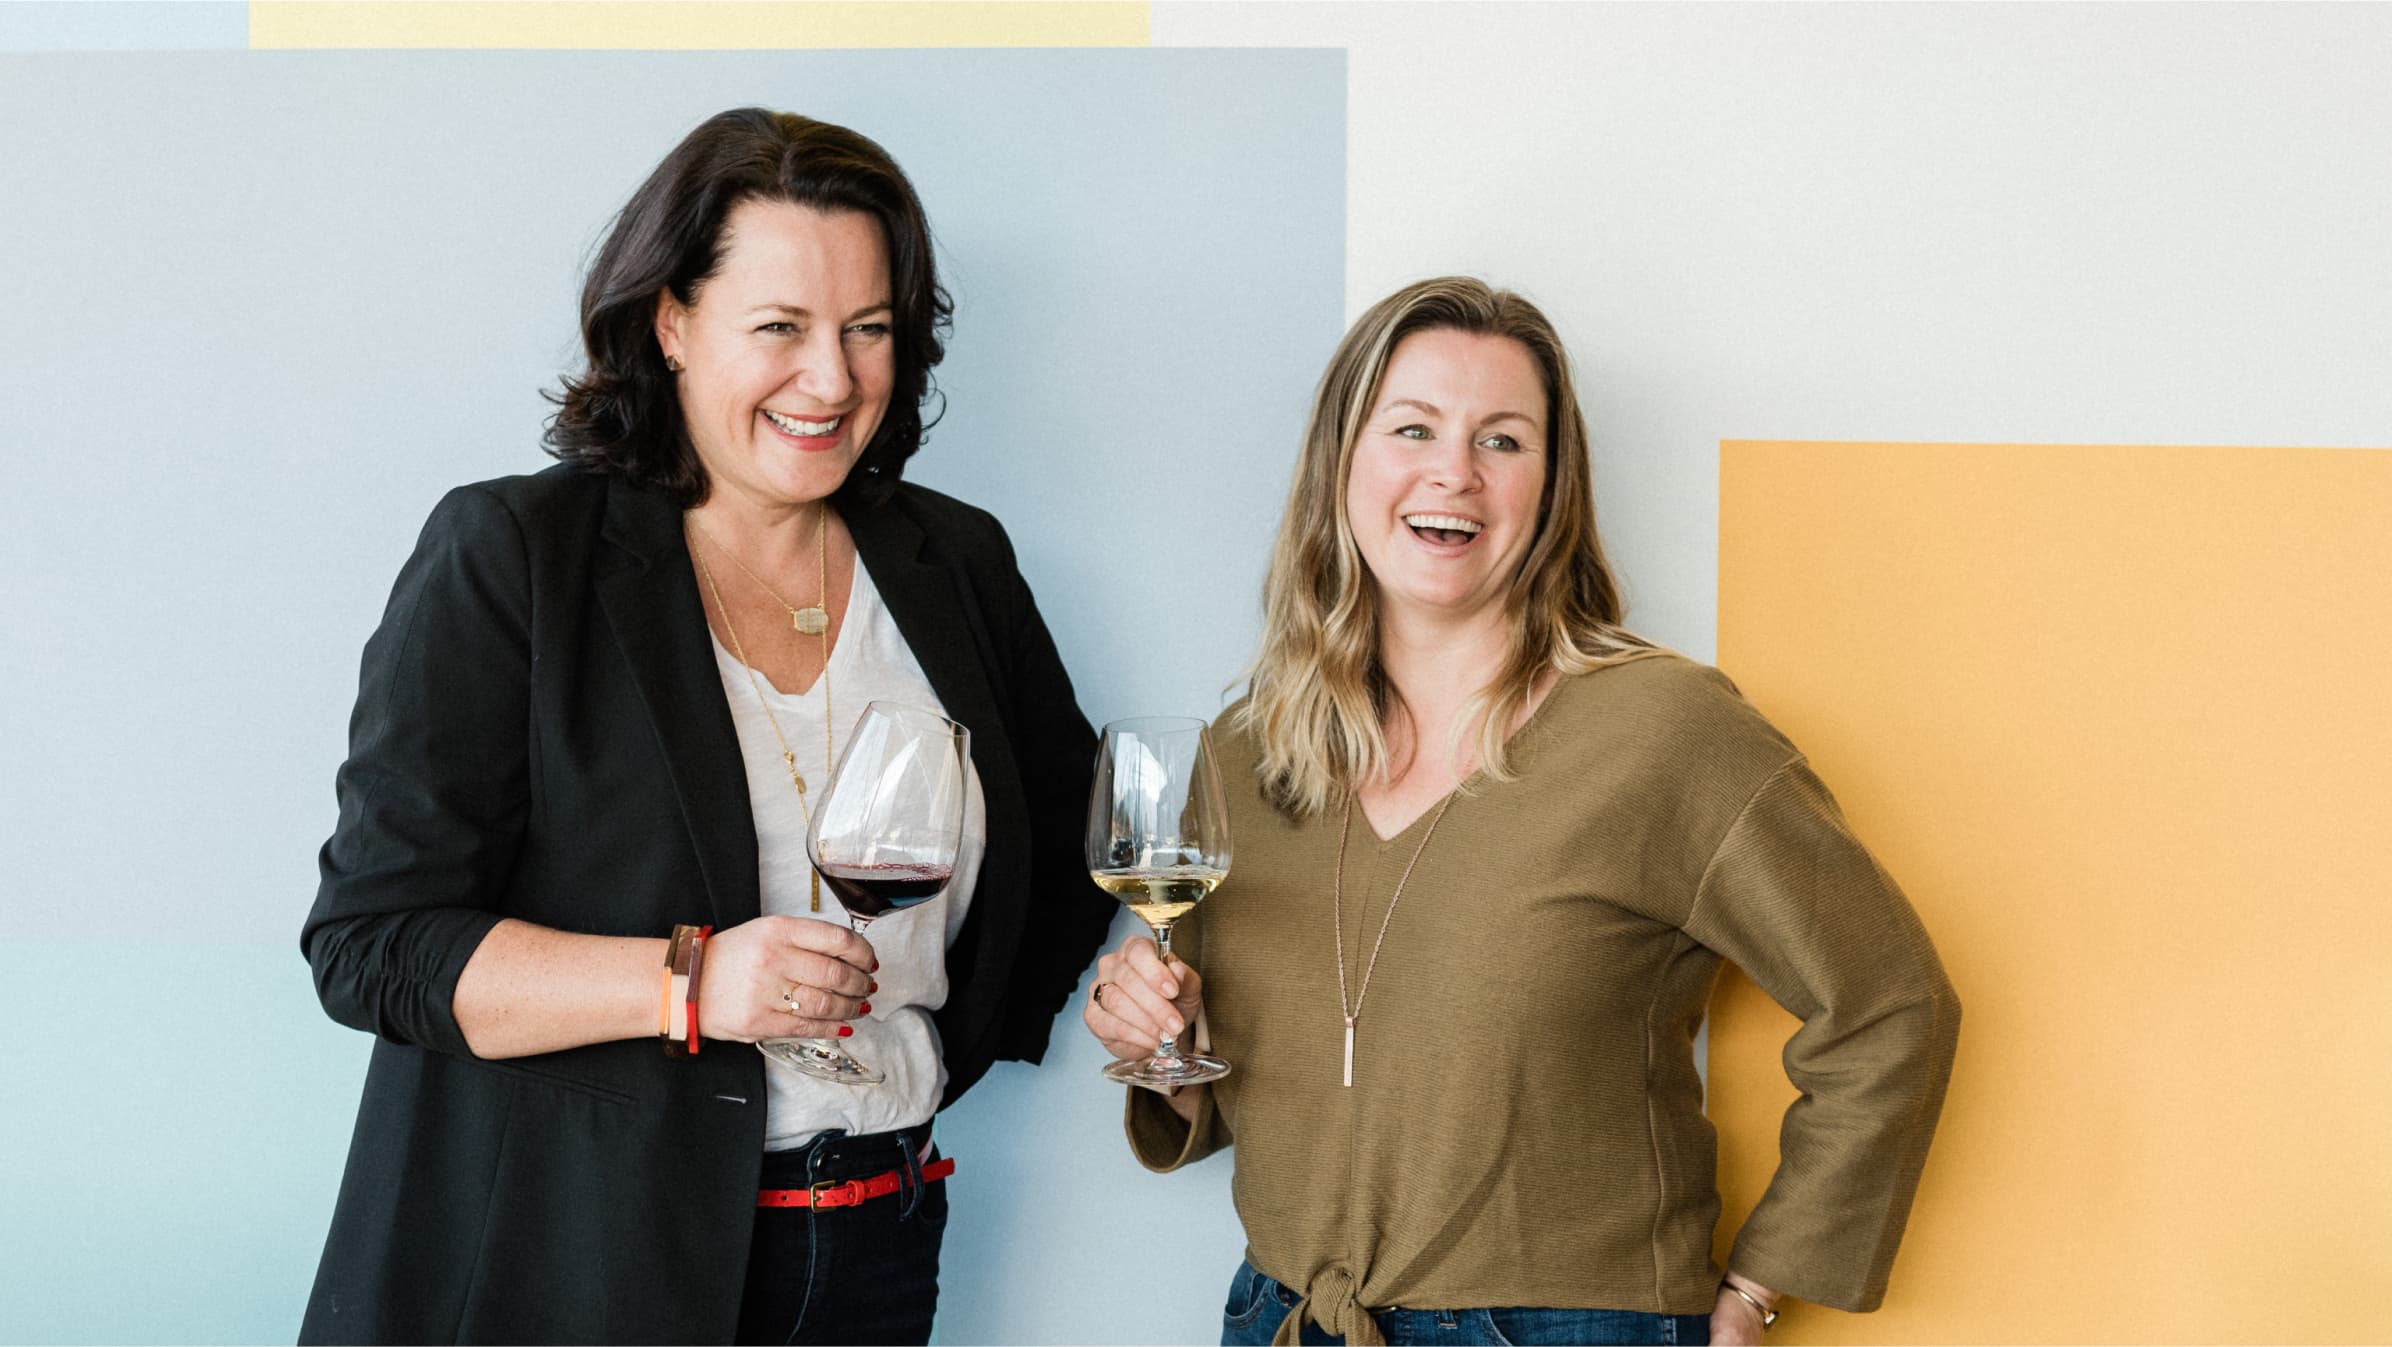 Nicole Hughes and Anne Siegel, owners of Olive and Poppy, laughing over a glass of wine.